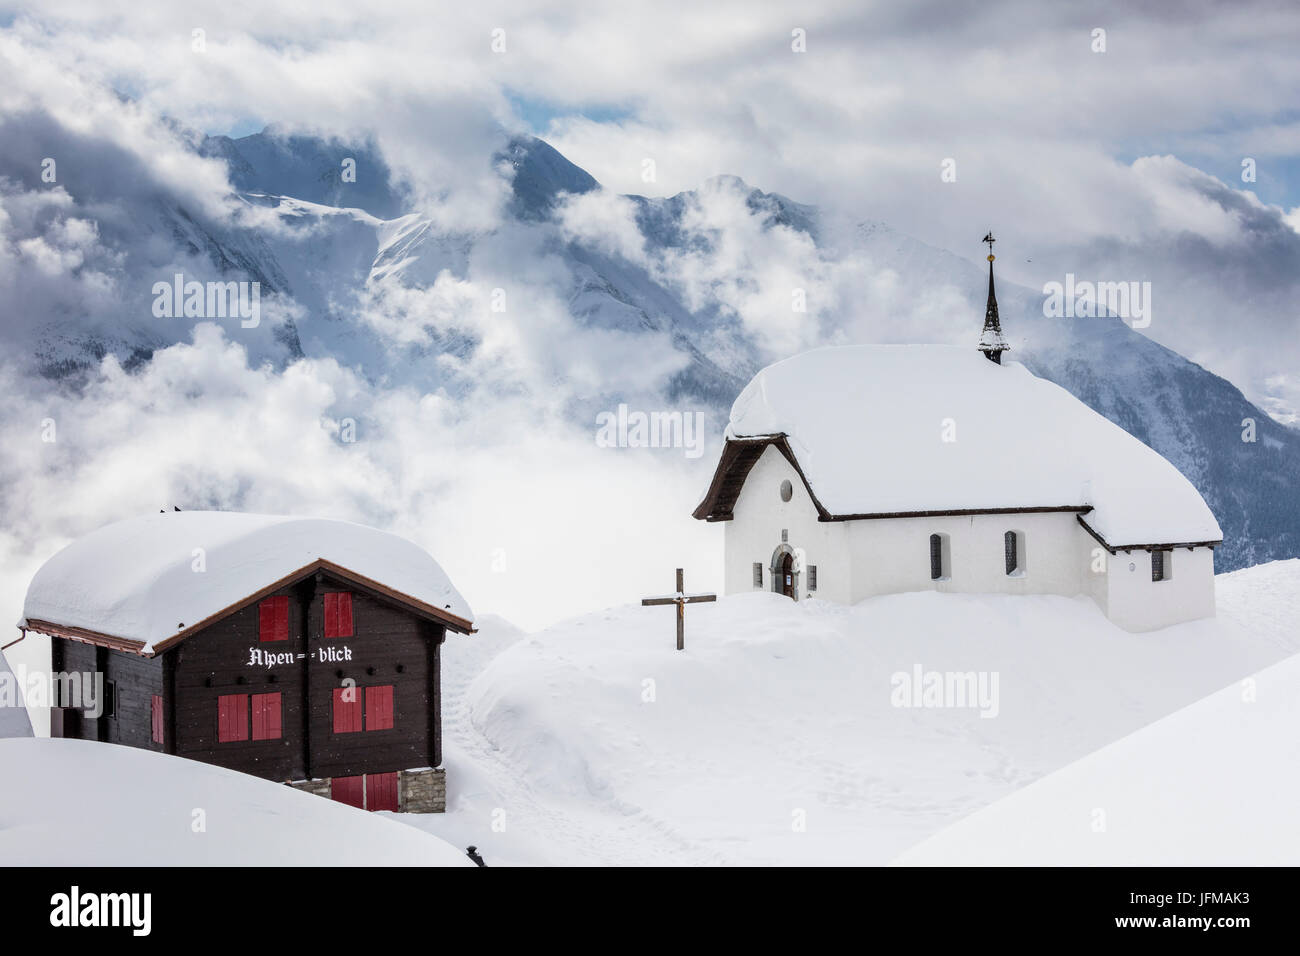 Clouds above the mountain huts and church covered with snow Bettmeralp district of Raron canton of Valais Switzerland Europe Stock Photo